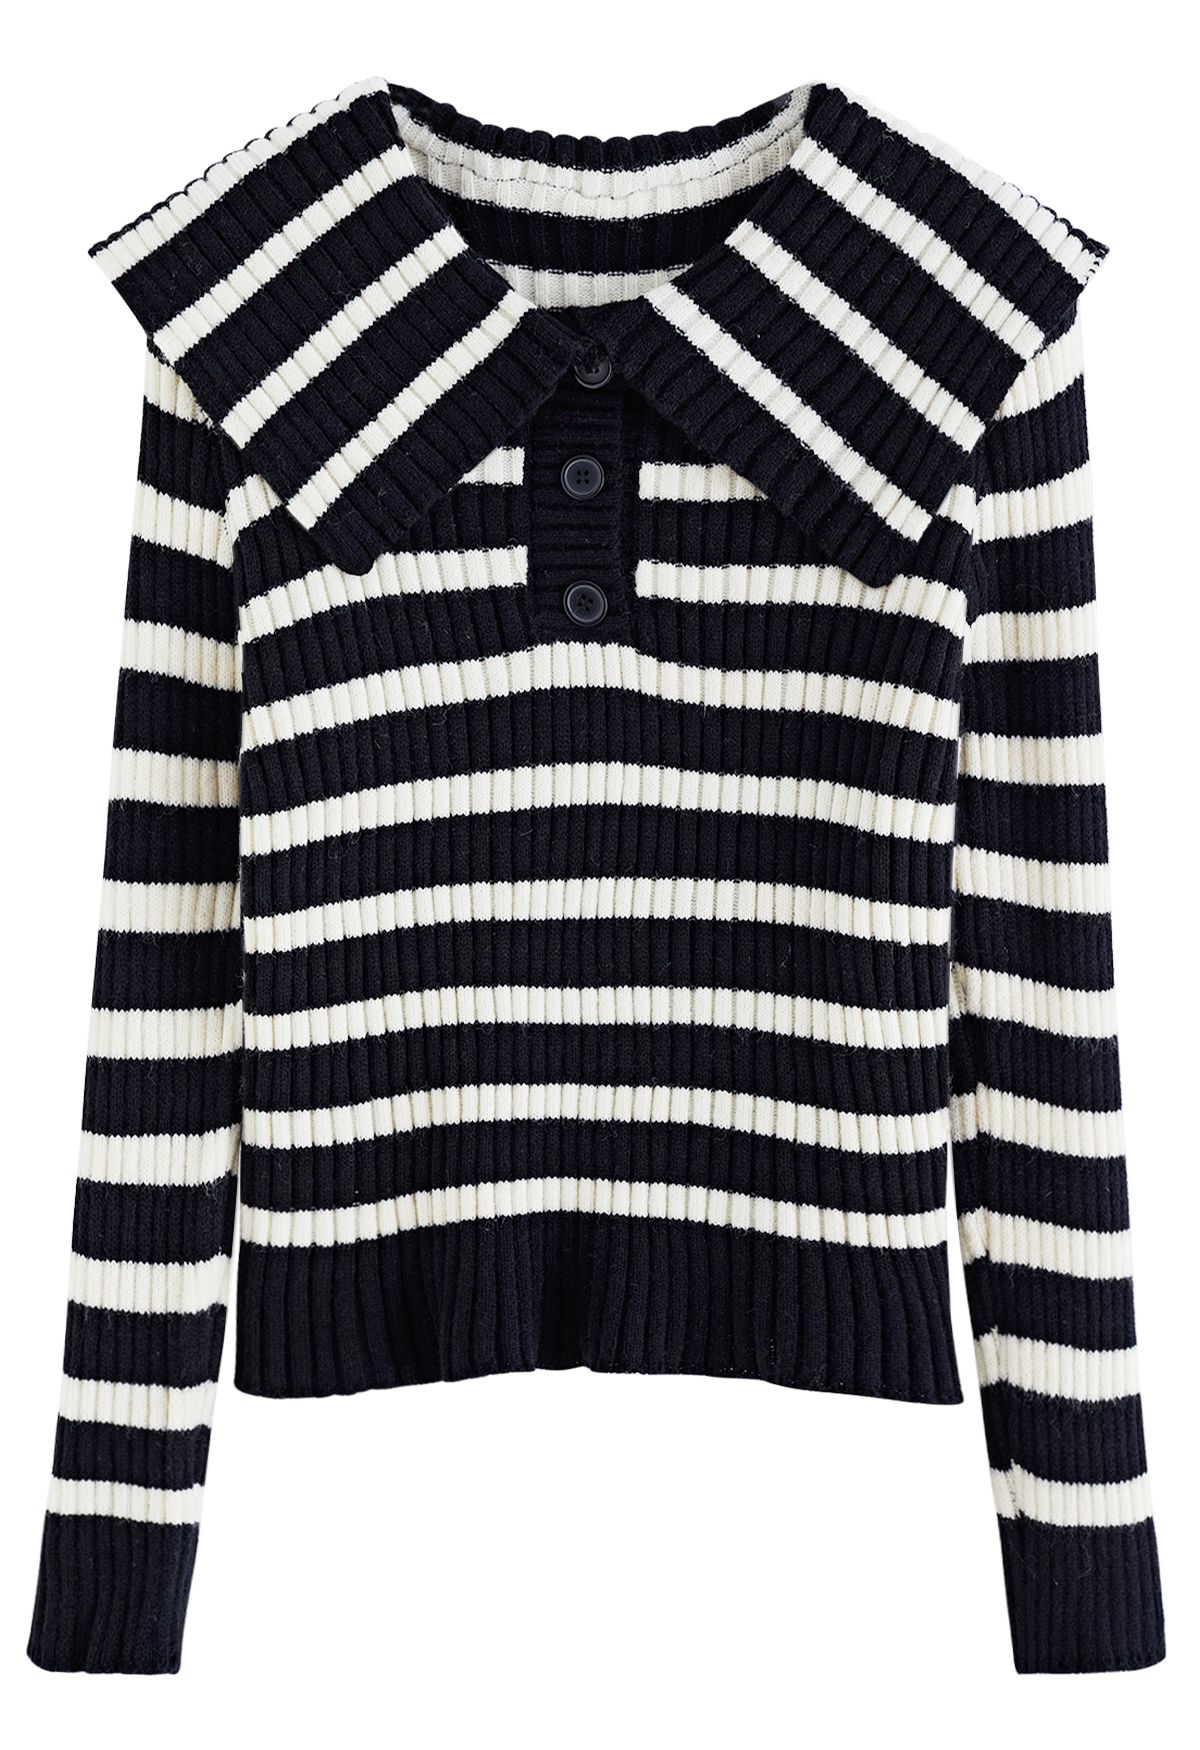 Flap Collar Striped Knit Sweater in Black - Retro, Indie and Unique Fashion